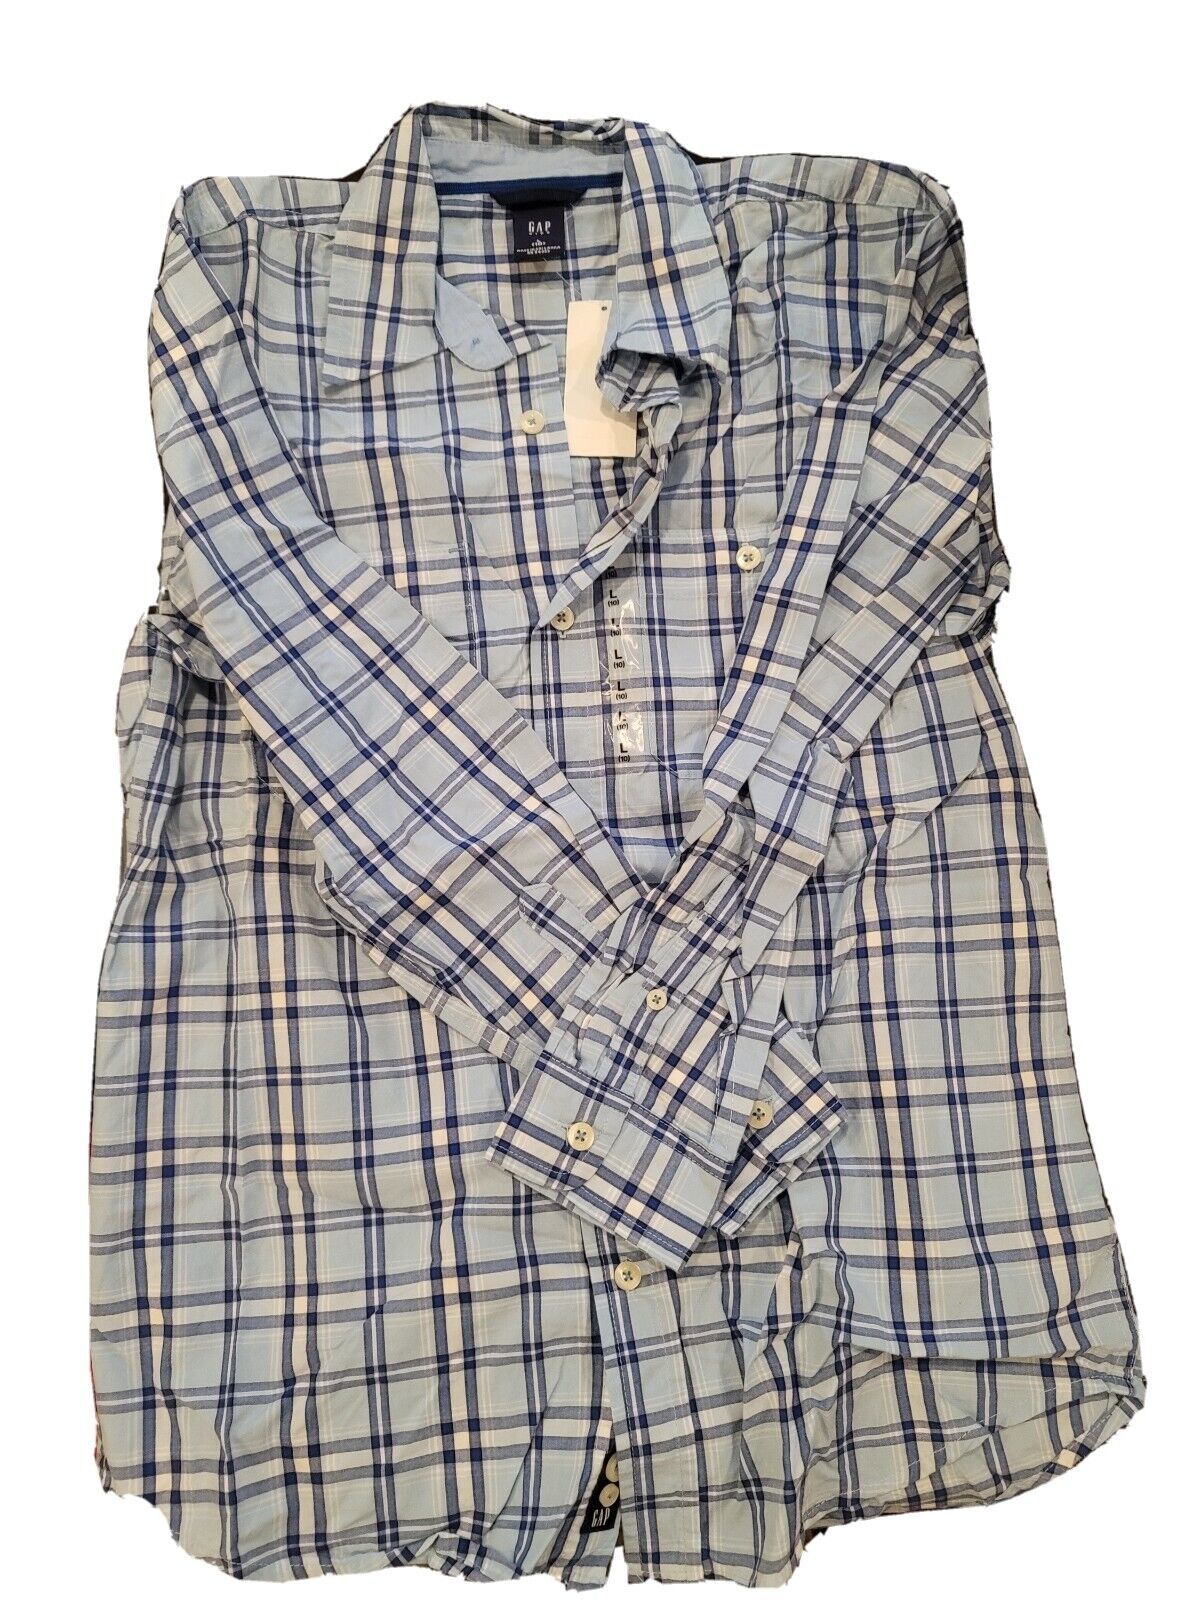 Primary image for NWT New With Tags GAP Boy's Blue Plaid Long Sleeve Dress Shirt Size L (10)